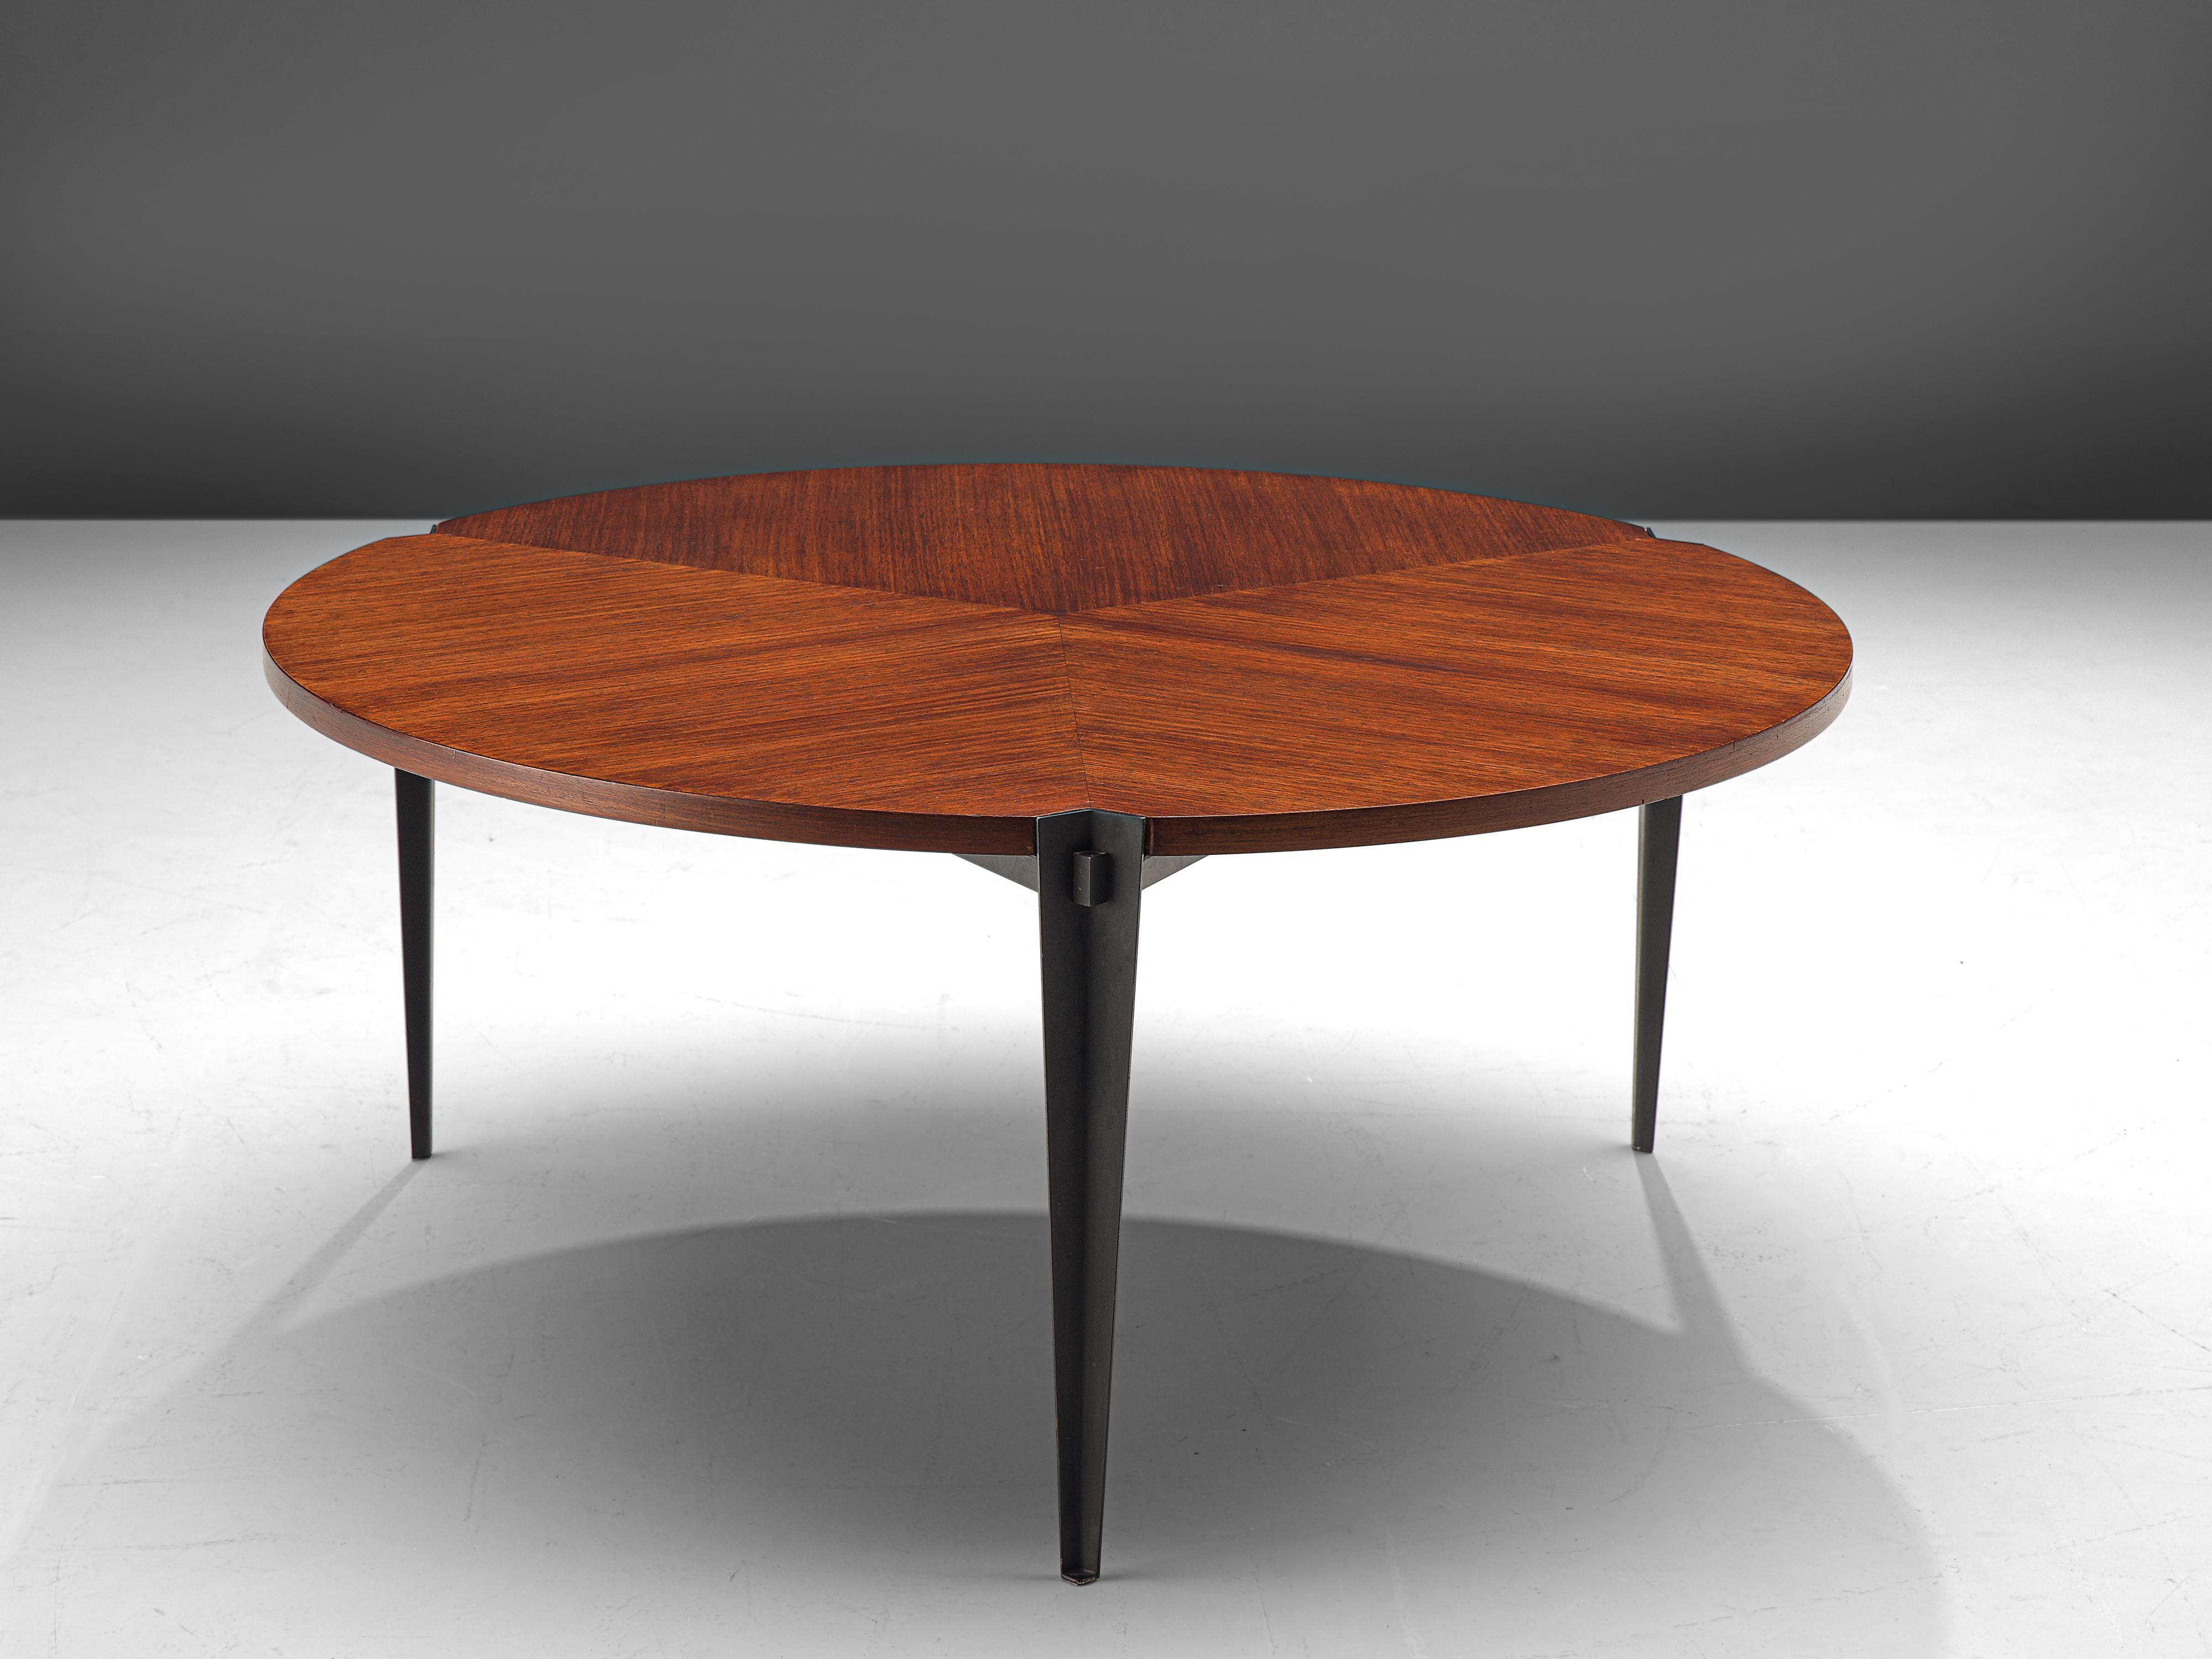 Osvaldo Borsani for Tecno, coffee table model 'T61', teak and metal, Italy, 1957.

Elegant coffee tables, designed by Osvaldo Borsani and produced by Tecno. The table has a round tabletop of teak veneer, which is inlayed in a triangular shape. The